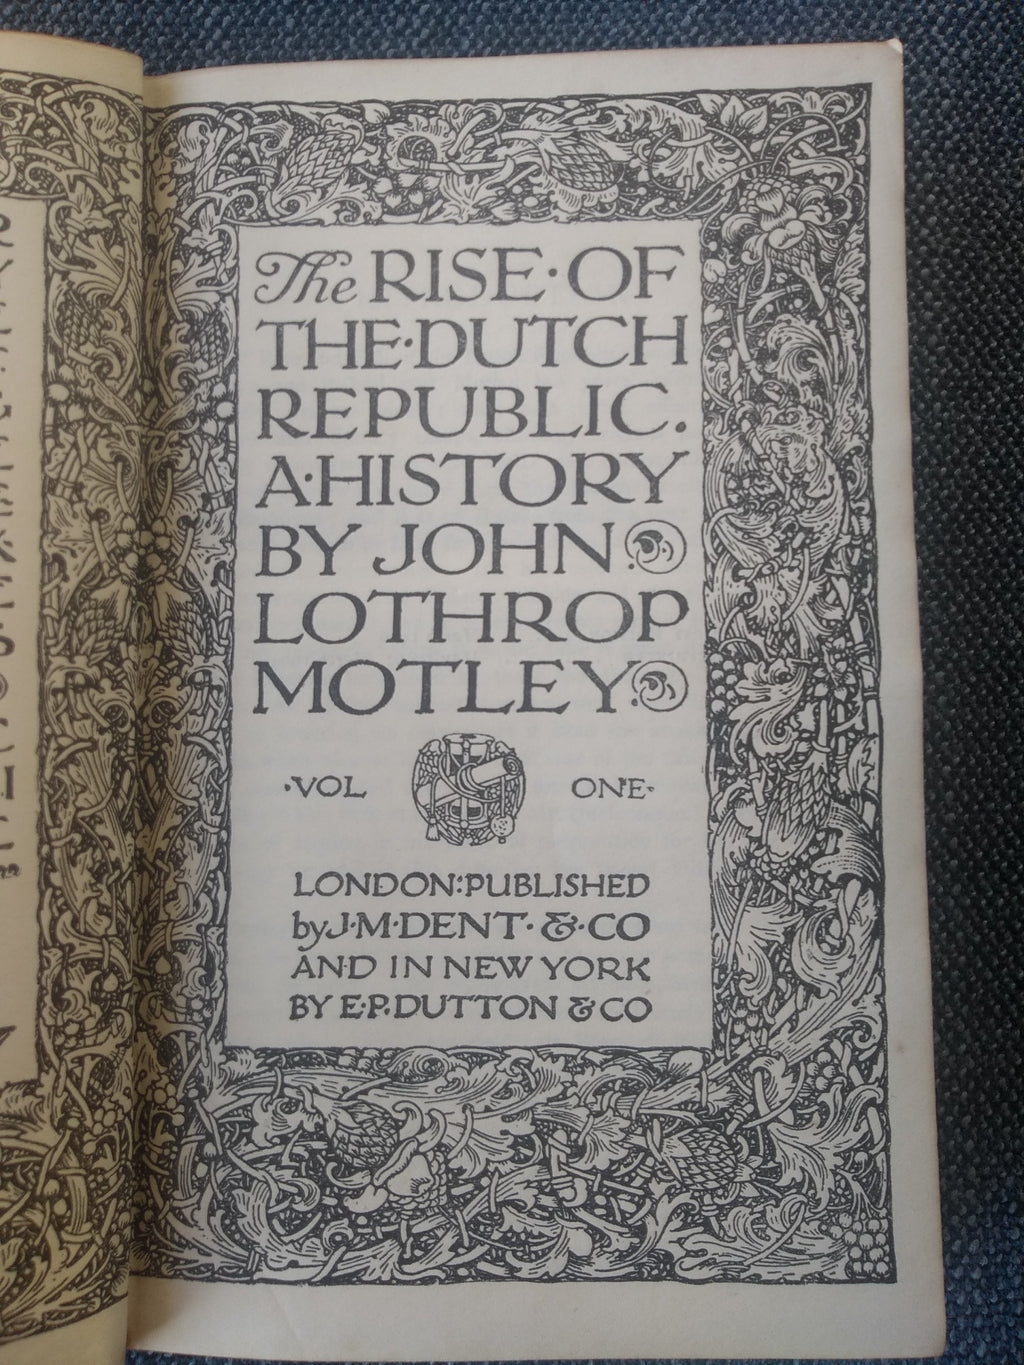 The Rise of the Dutch Republic: A History. Volume One, by John Lothrop Motley